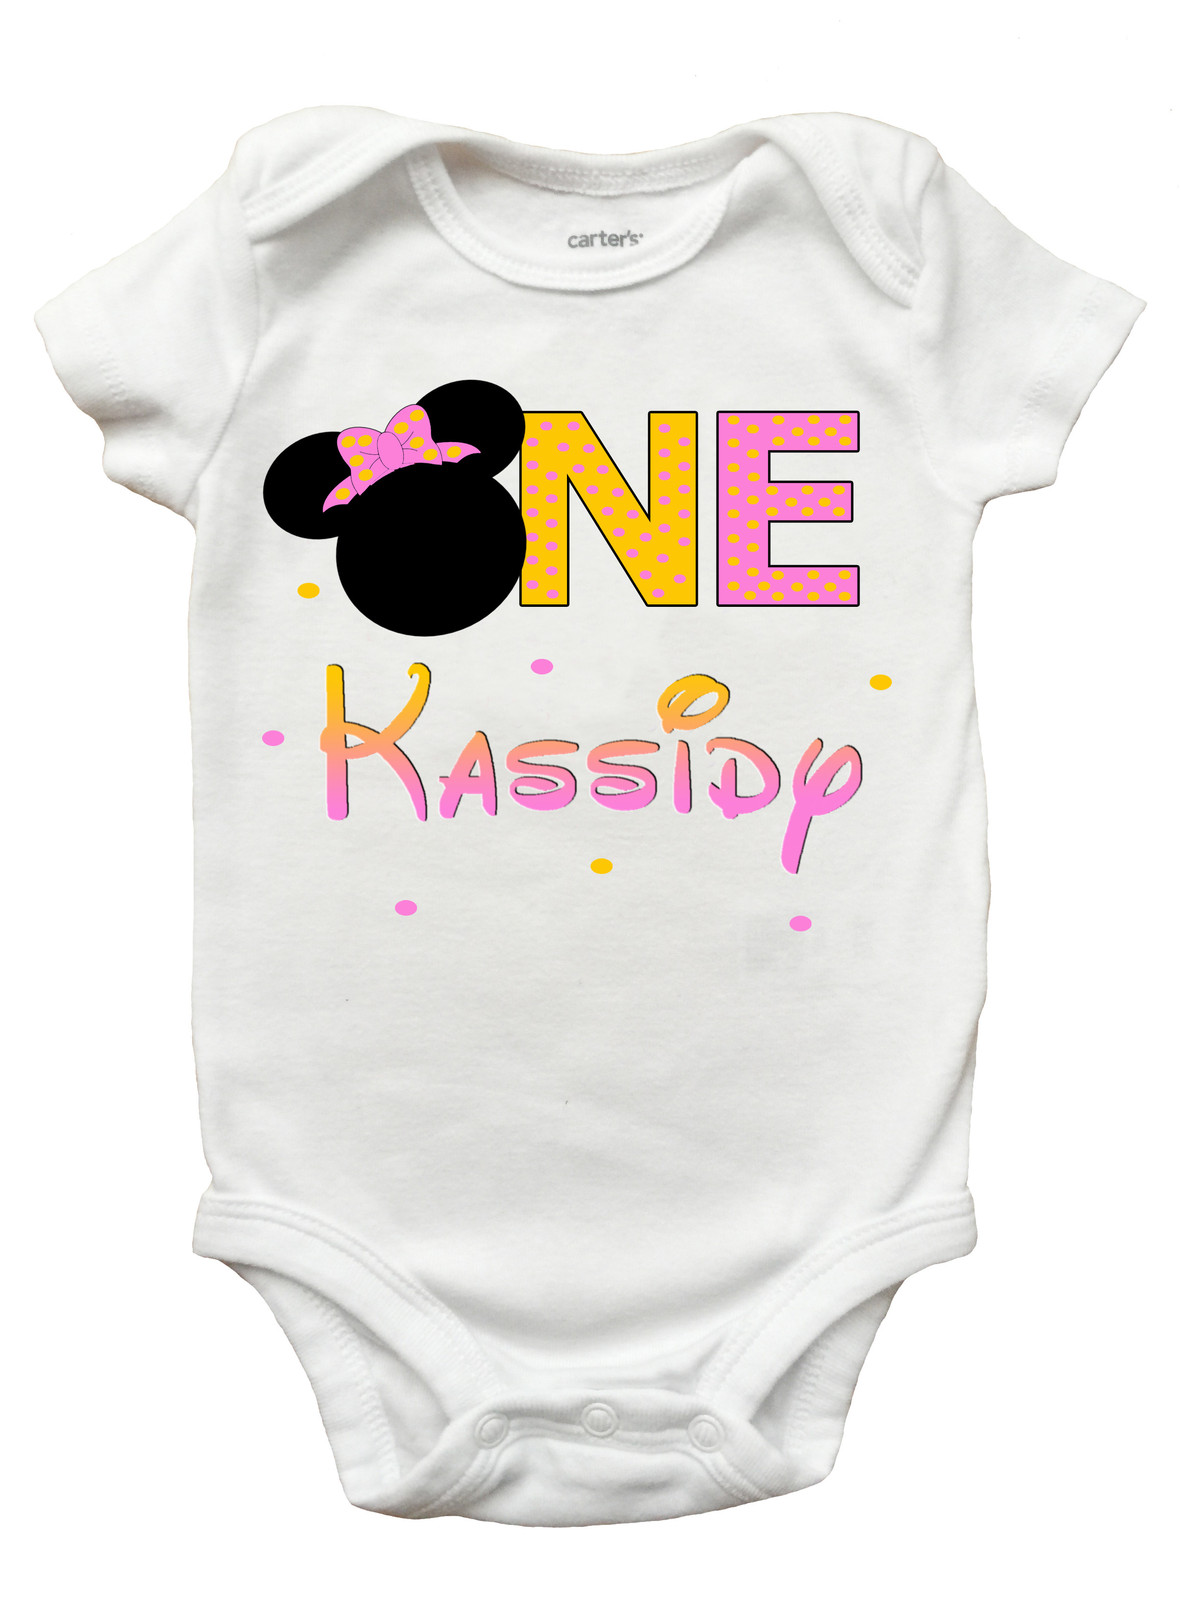 Minnie Mouse First Birthday One Piece Bodysuit - Personalized Minnie Mouse Onesi - $12.99